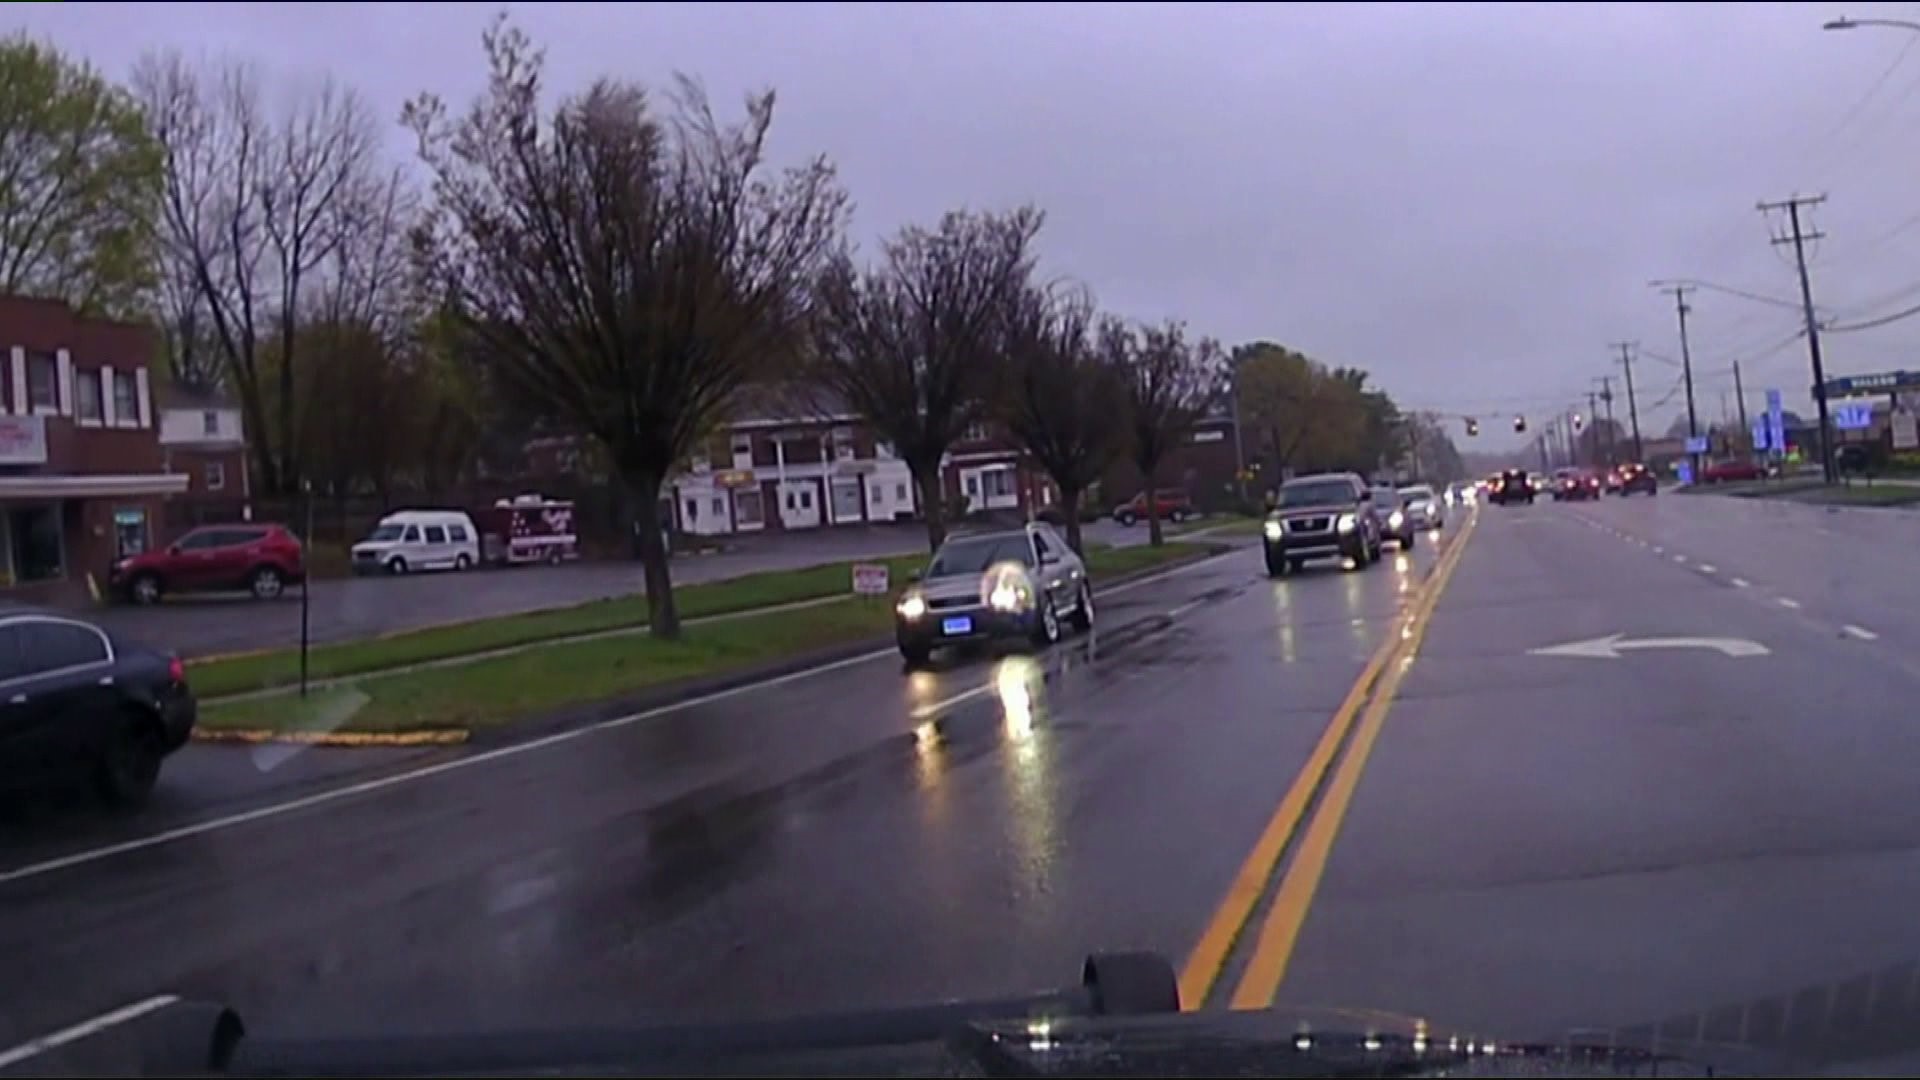 Officer involved shooting, first dash cam video